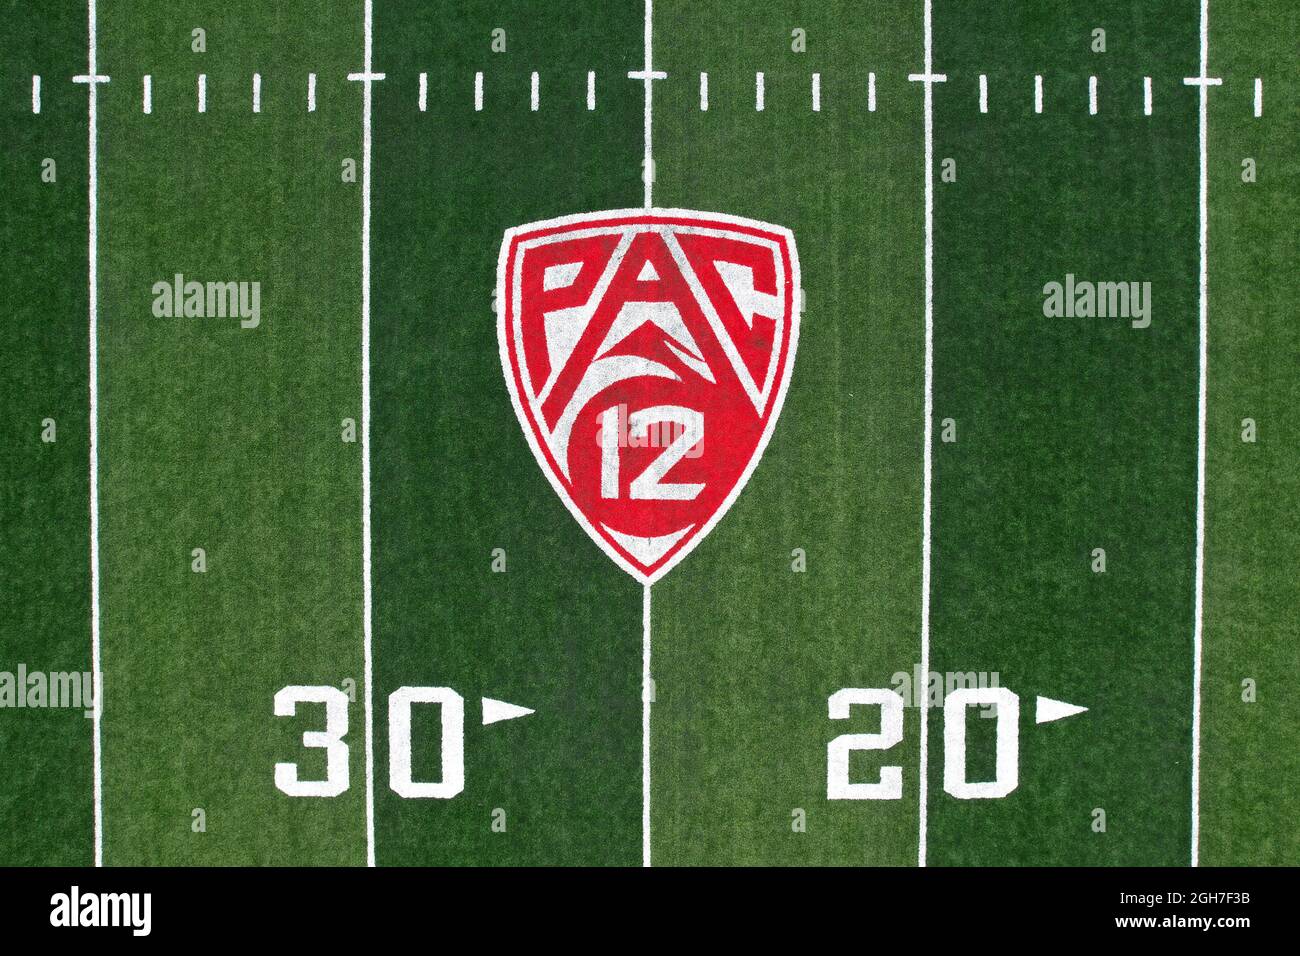 An aerial view o the Paca-12 Conference logo on the football field at f Rice-Eccles Stadium on the campus of the University of Utah, Sunday, Sept. 5, Stock Photo